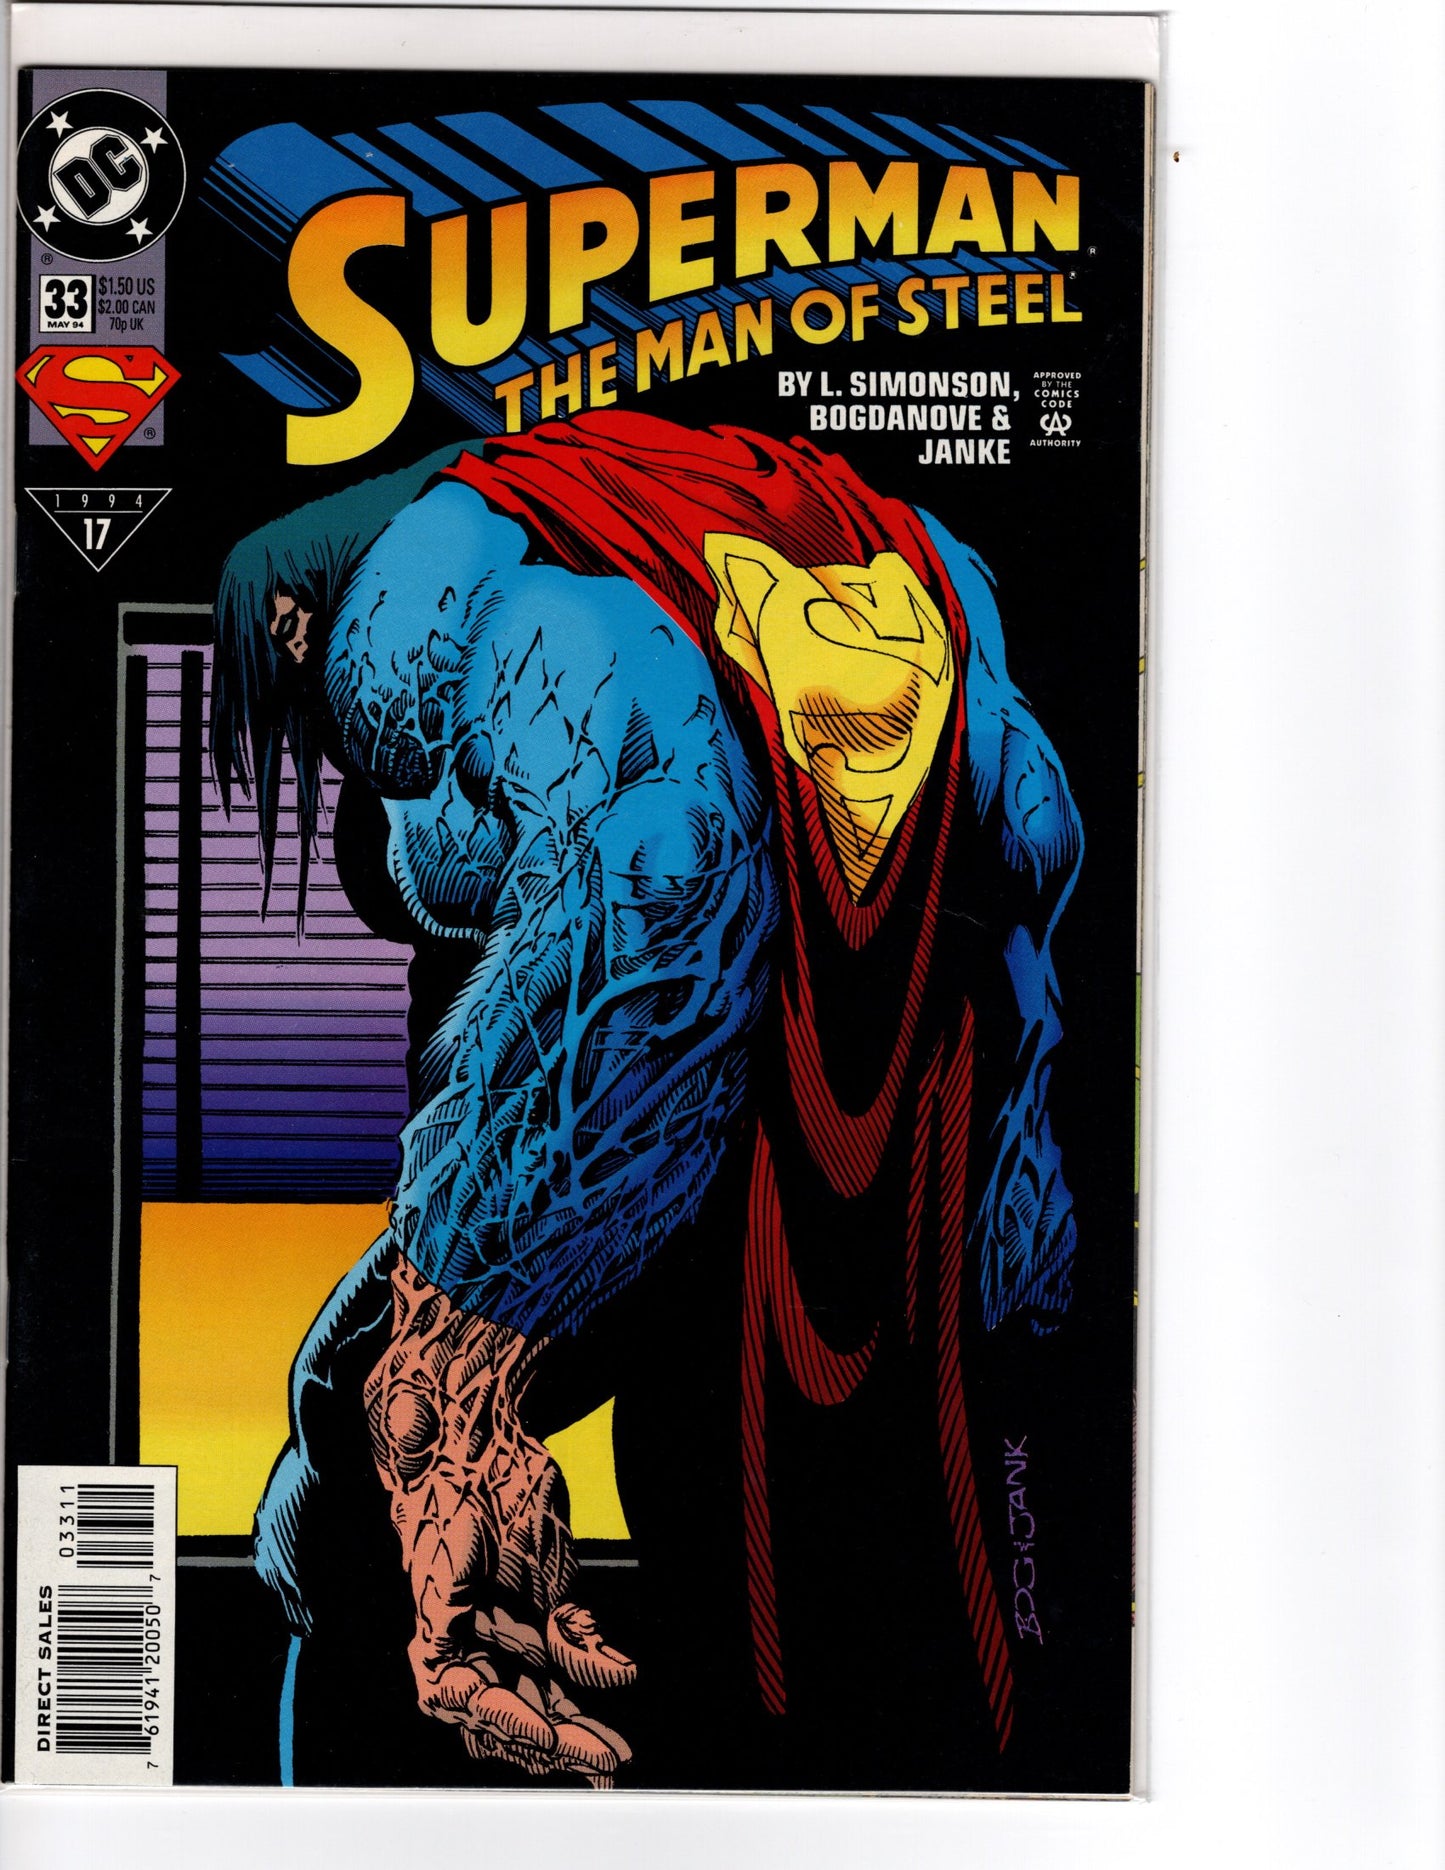 Superman - The Man of Steel No. 33